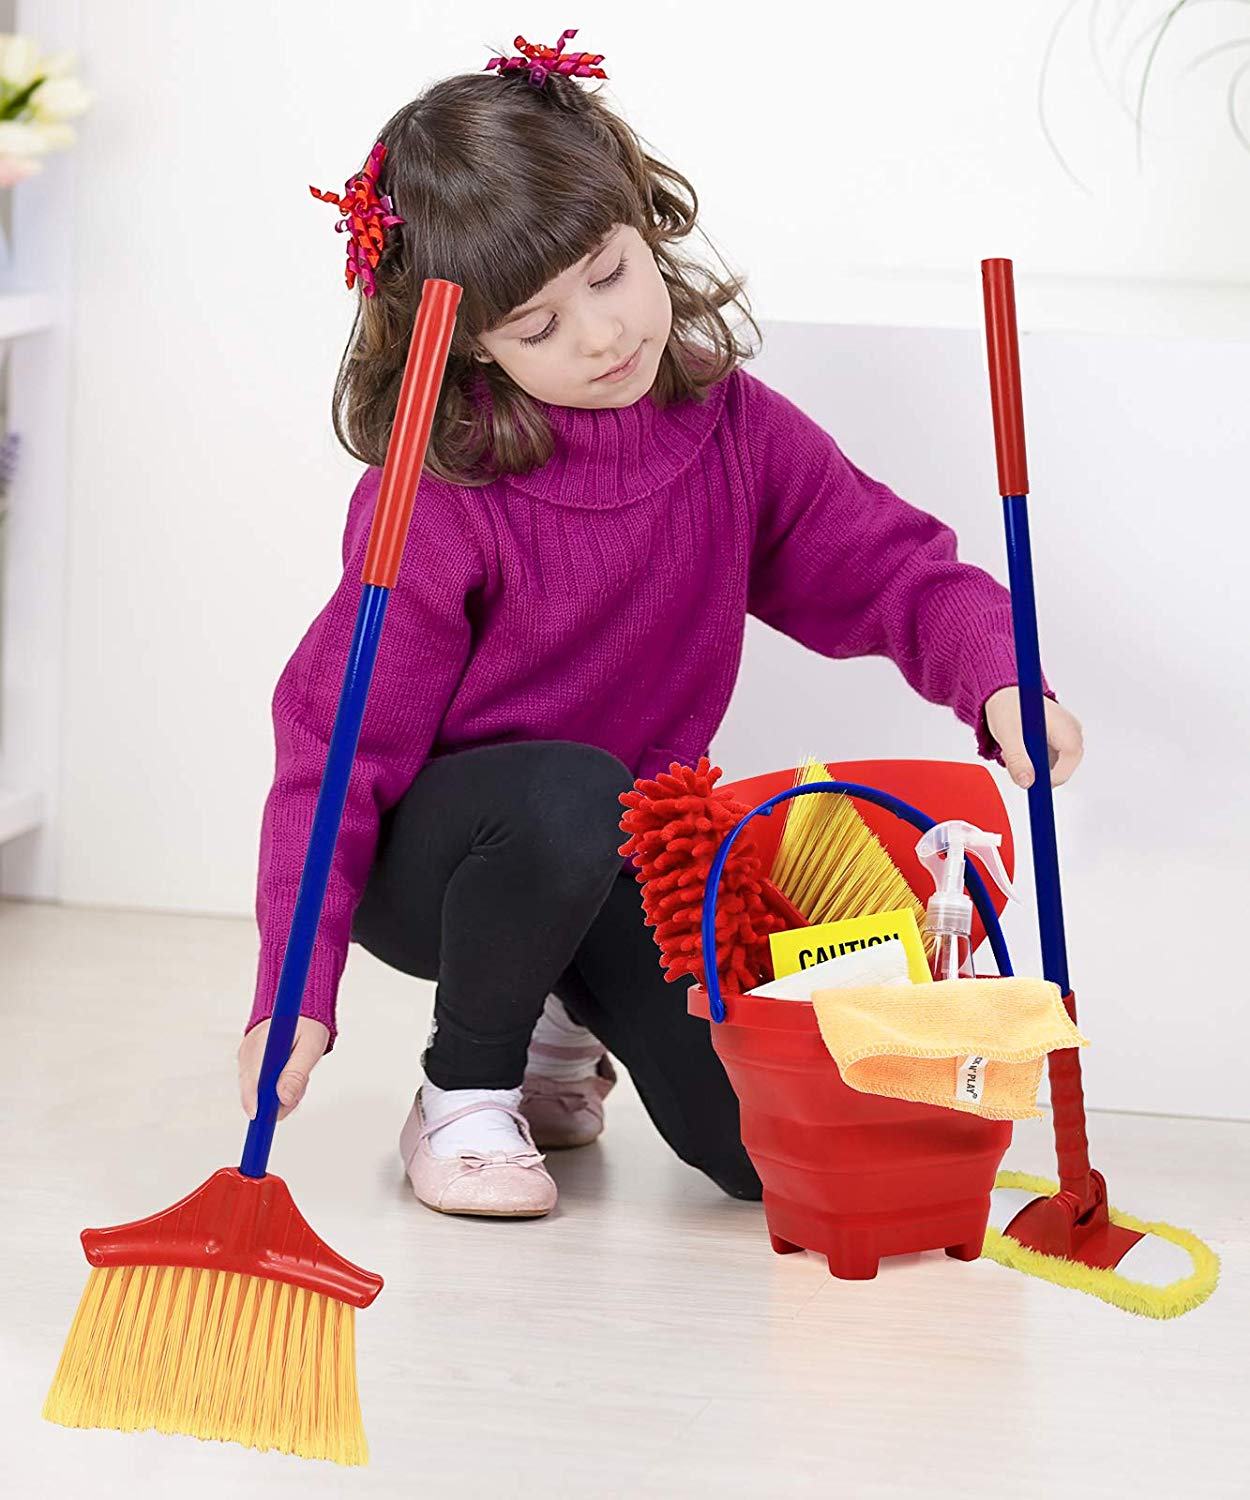 play broom set for toddlers